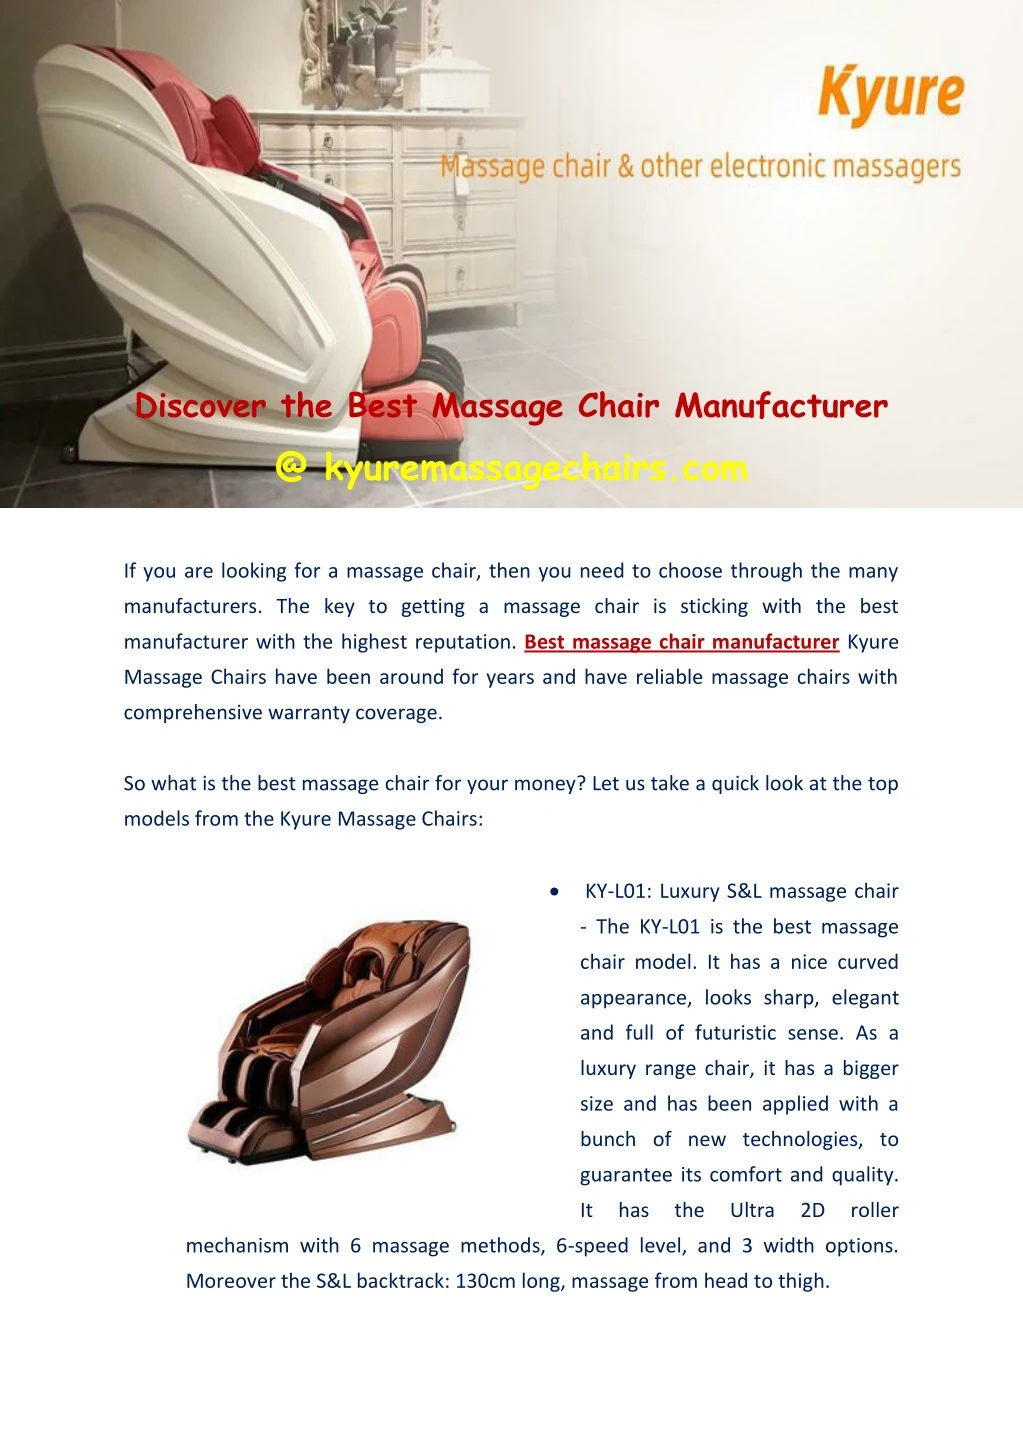 discover the best massage chair manufacturer